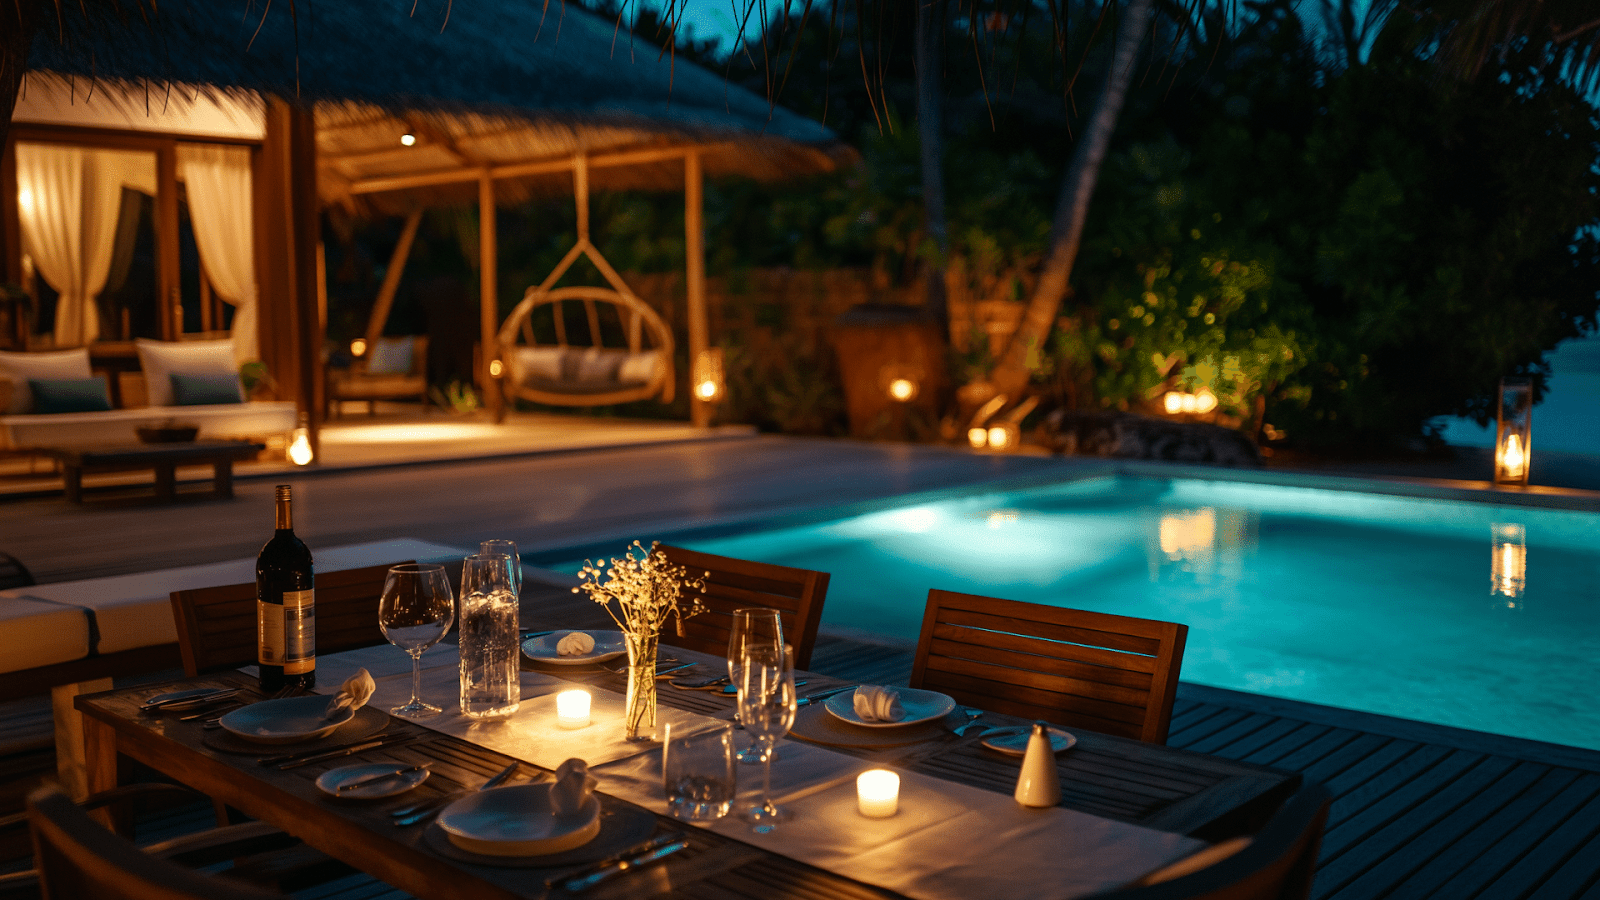 An elegant dining setup by the pool at a luxury vacation rental in the Maldives